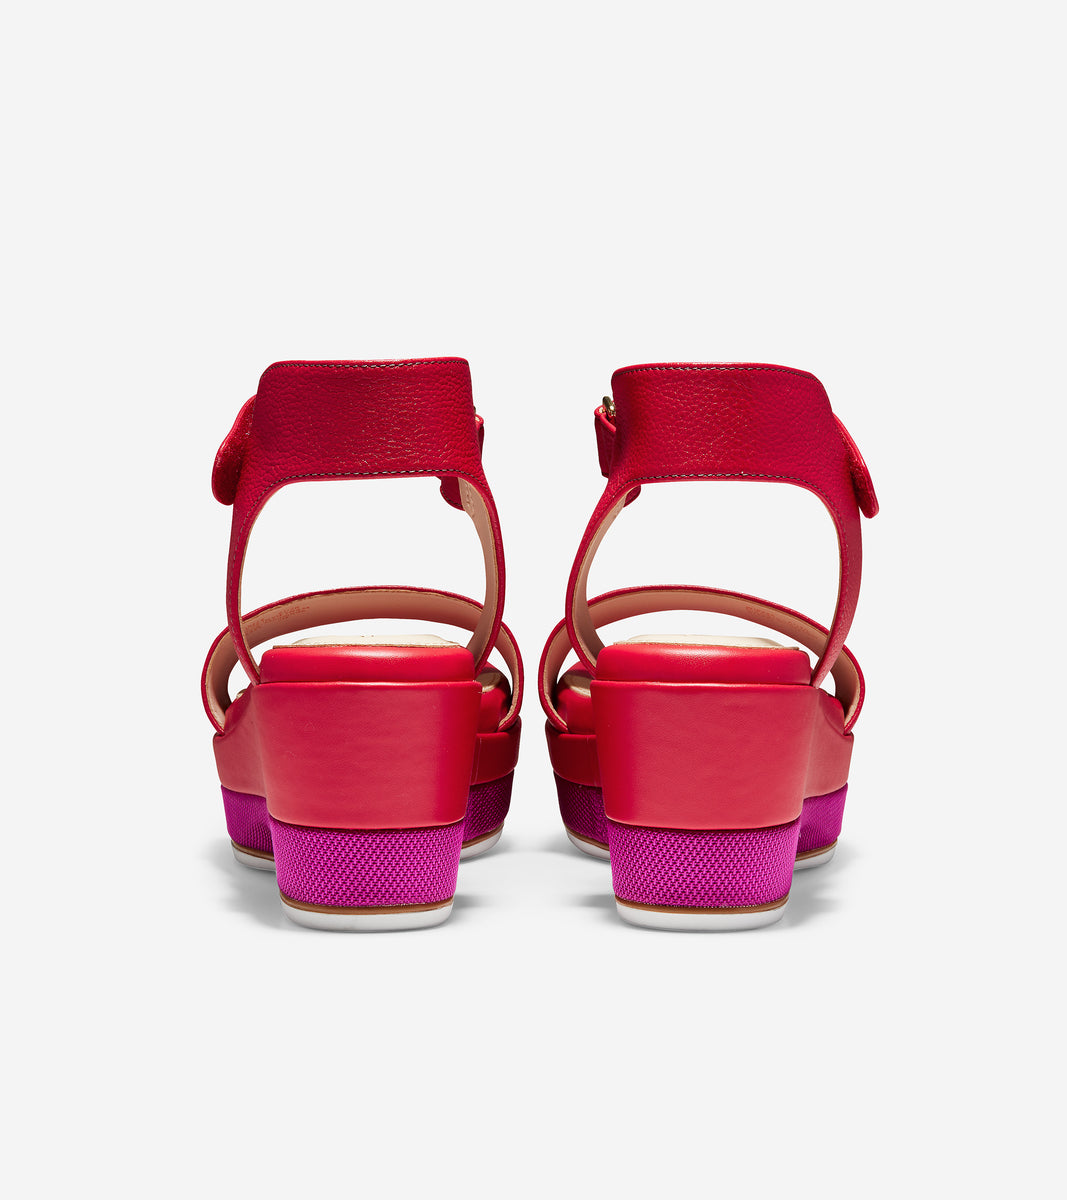 ColeHaan-Grand Ambition Flatform Sandal-w18224-Tango Red Tumbled Leather